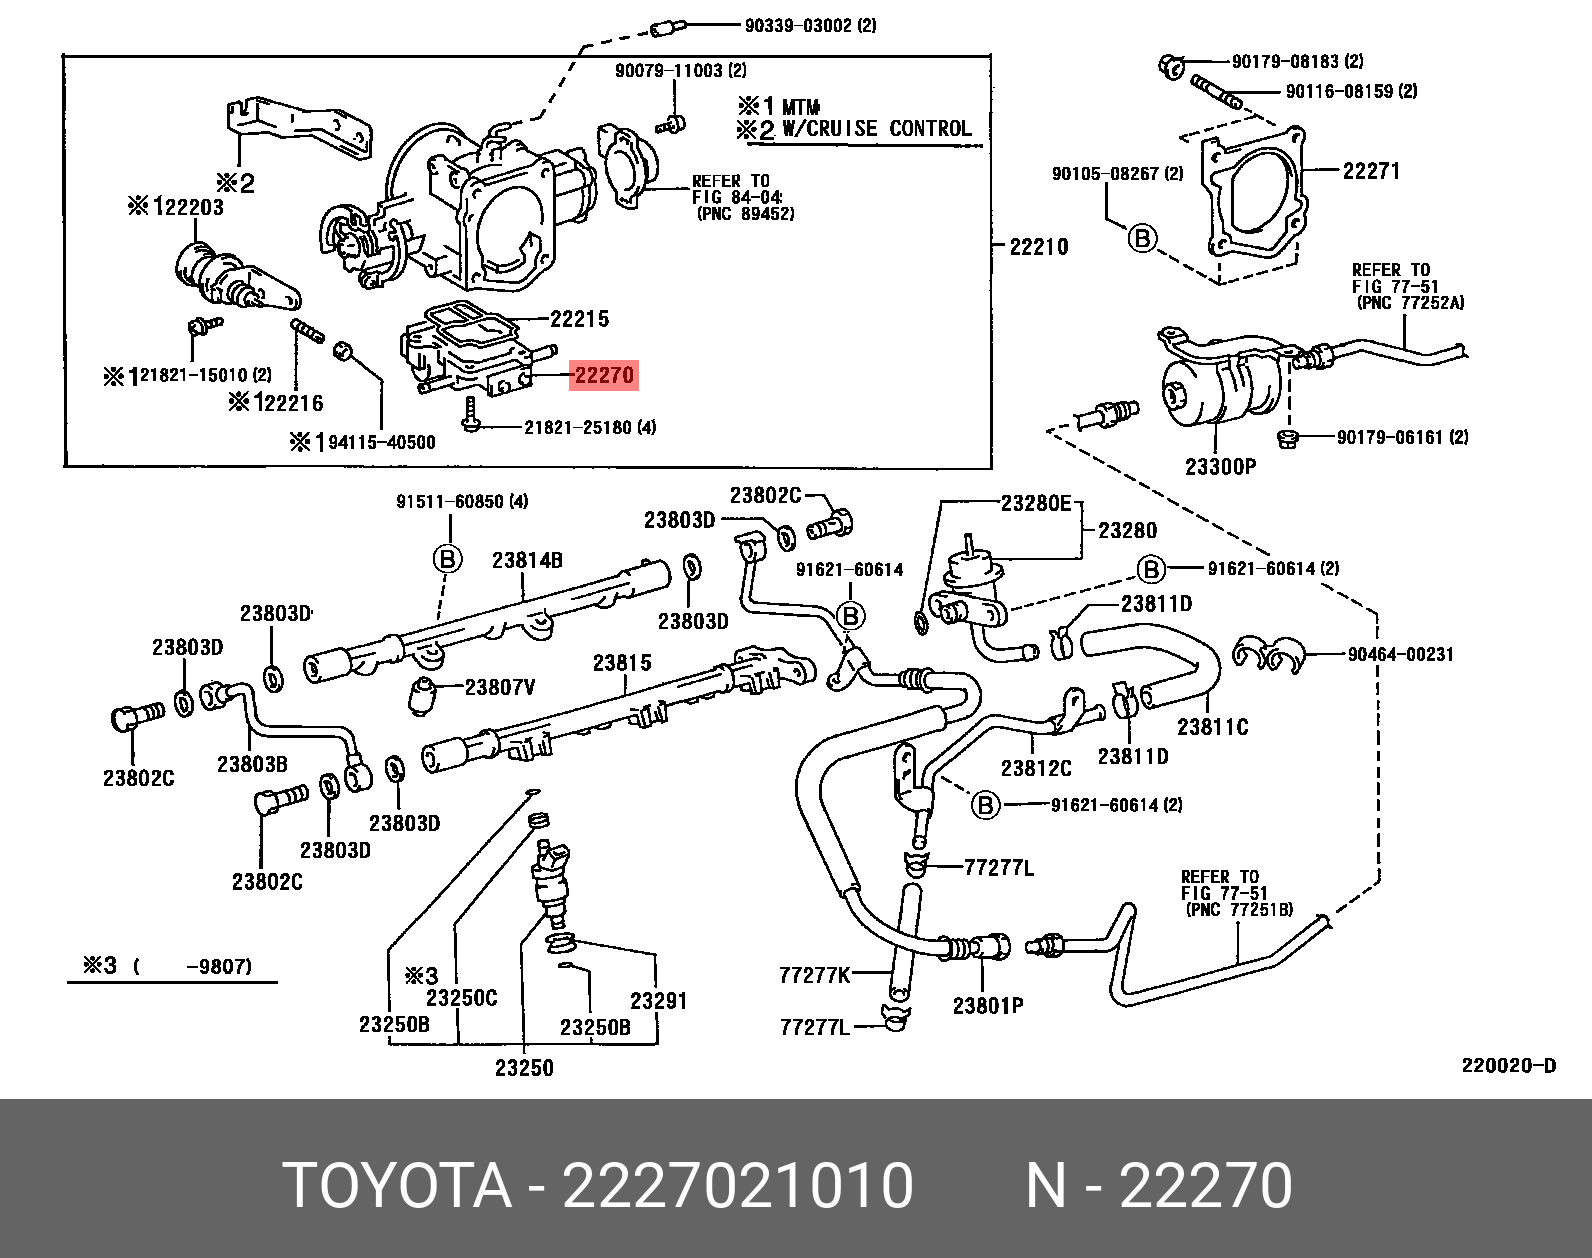 WILL CYPHA 200209 - 200507, VALVE ASSY, IDLE SPEED CONTROL(FOR THLOTTLE BODY)